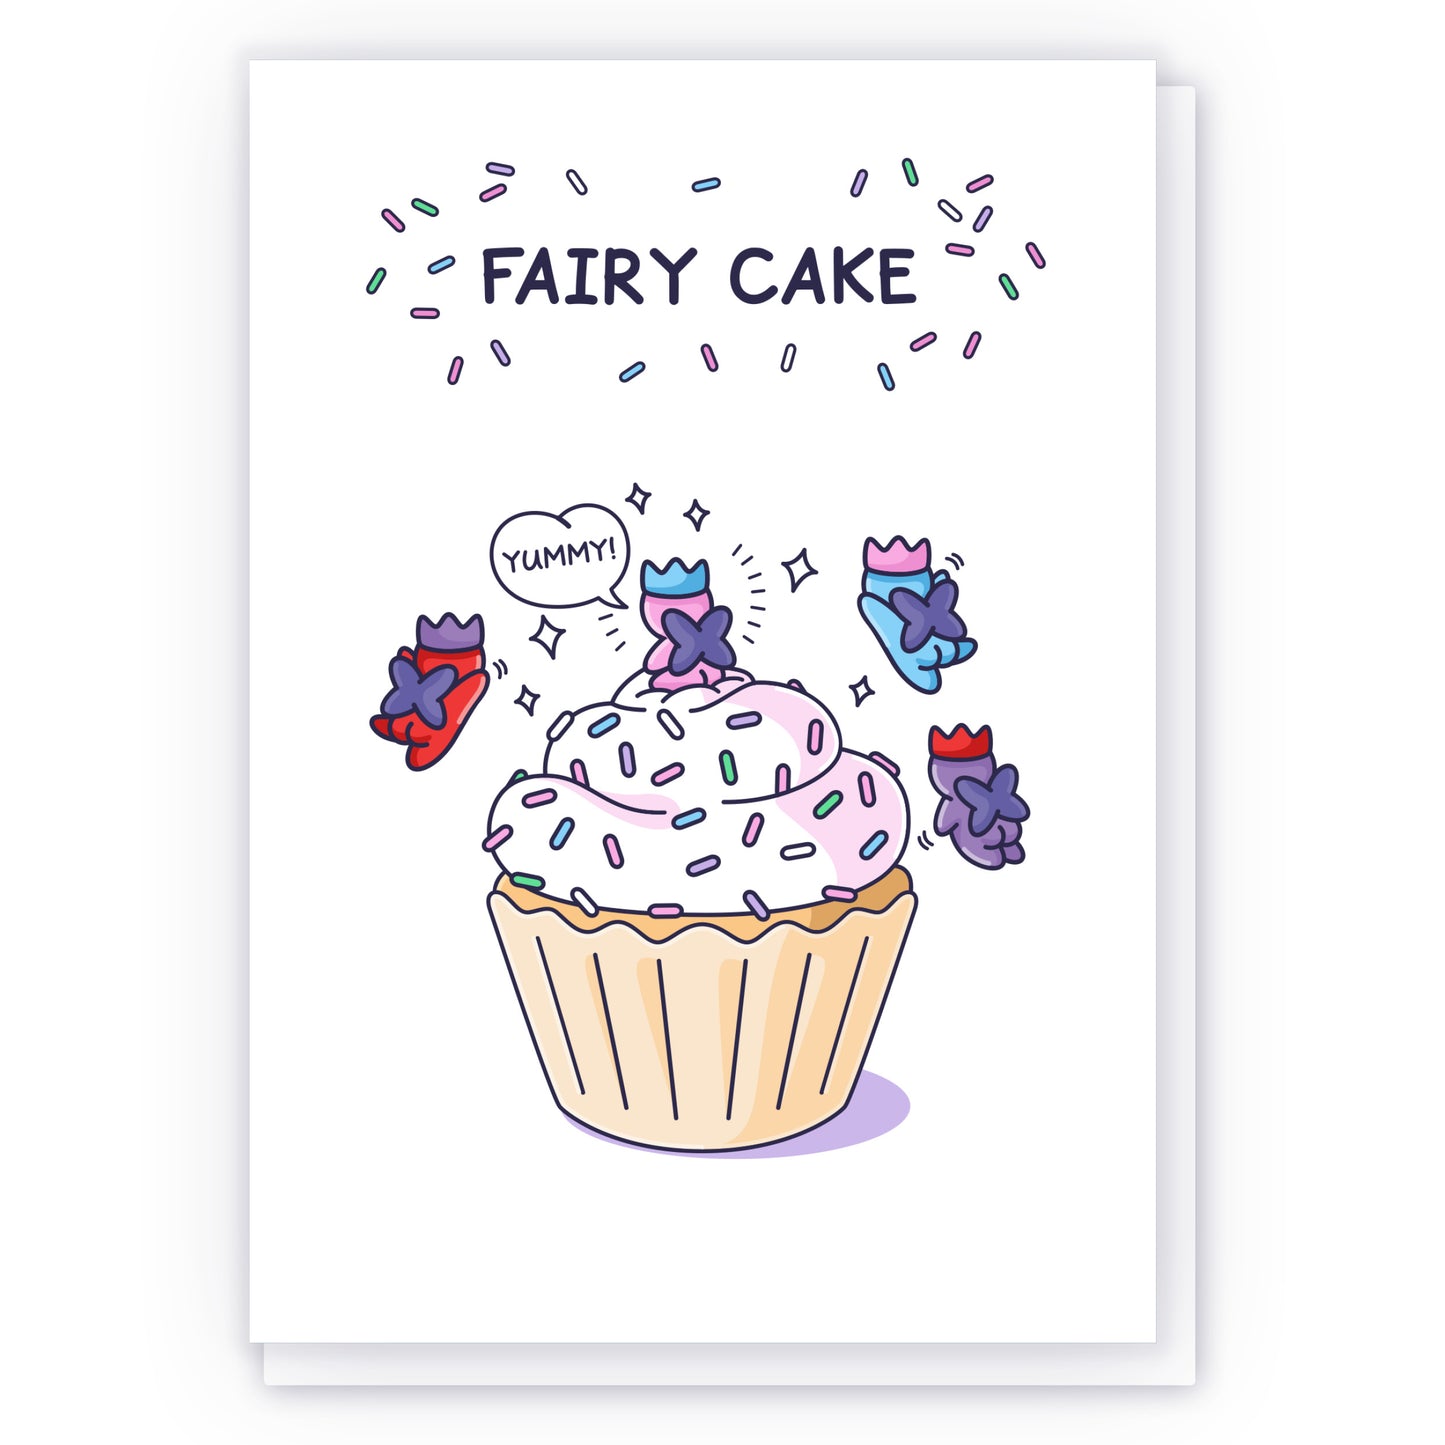 A cute funny greeting card with fairies surrounding a Fairy Cake.